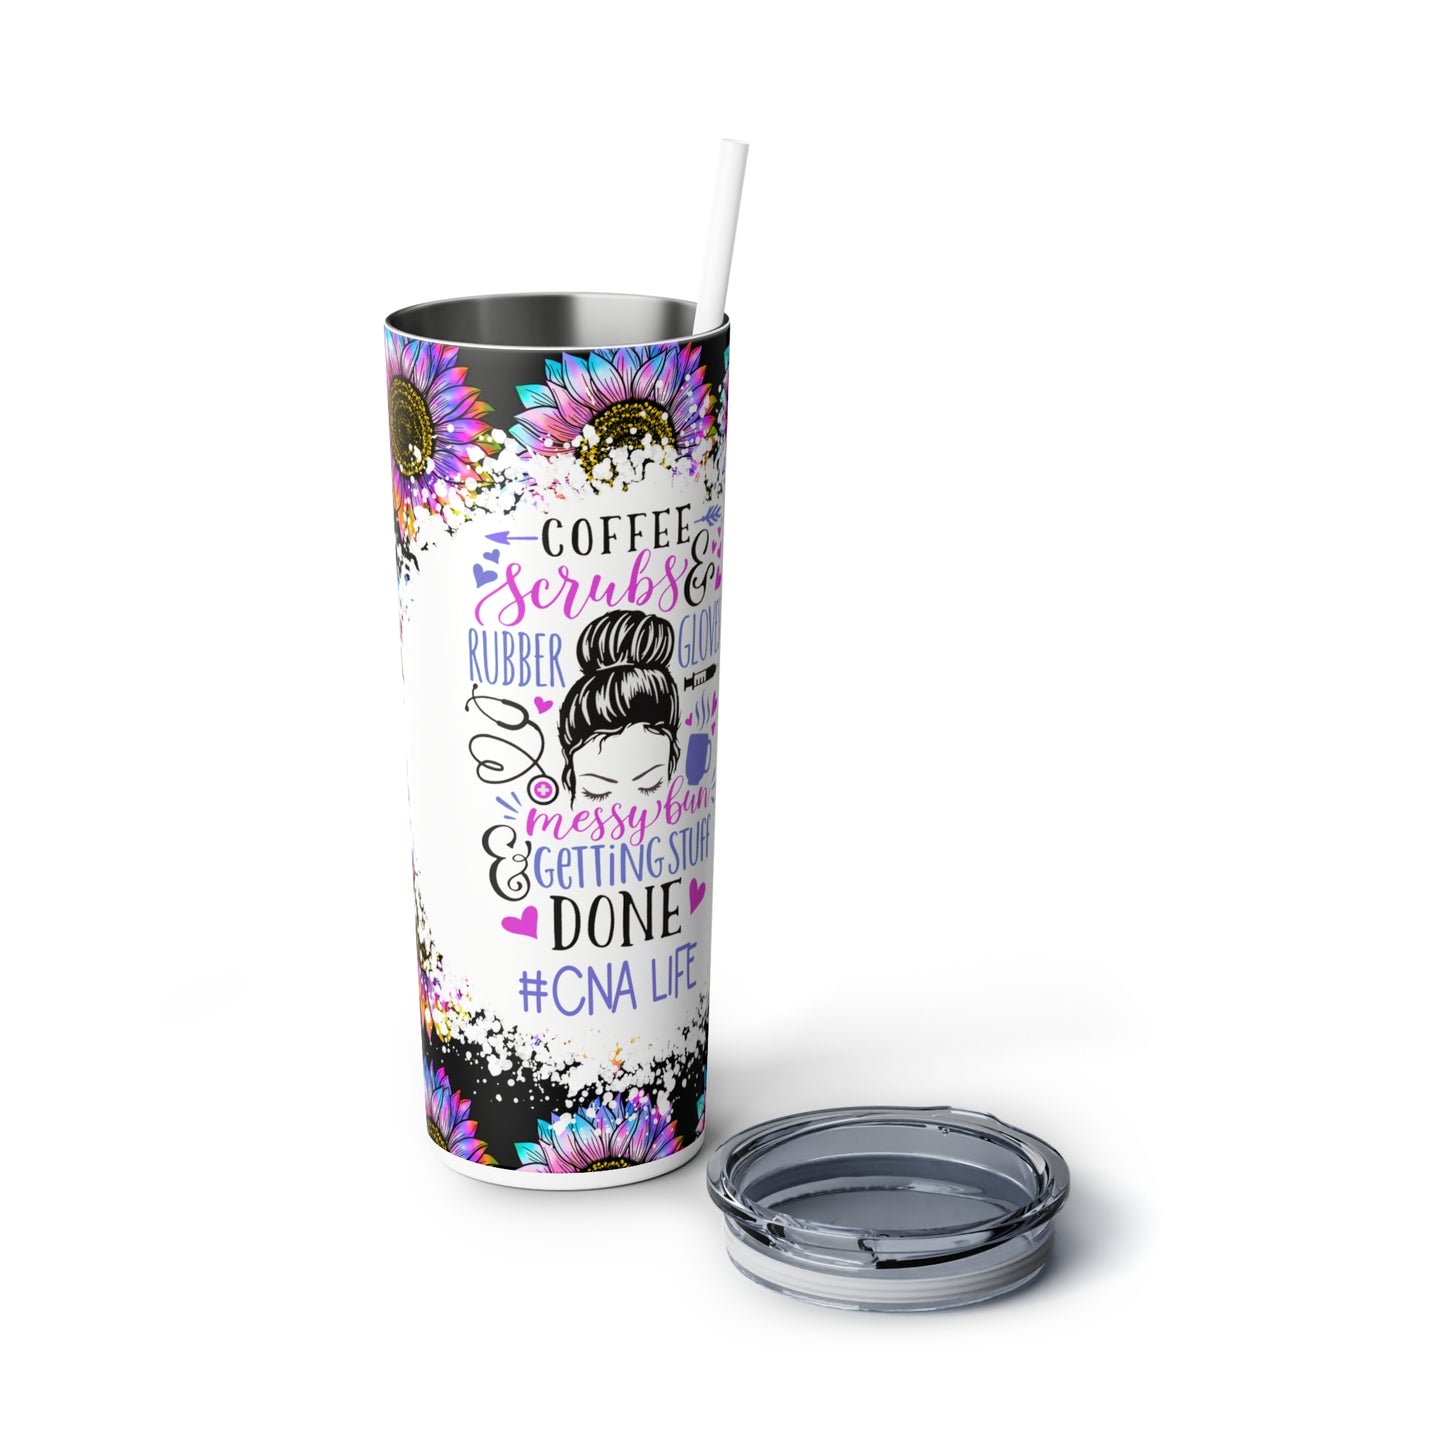 CNA Life Coffee Scrubs and Rubber Gloves 20 oz Skinny Tumbler